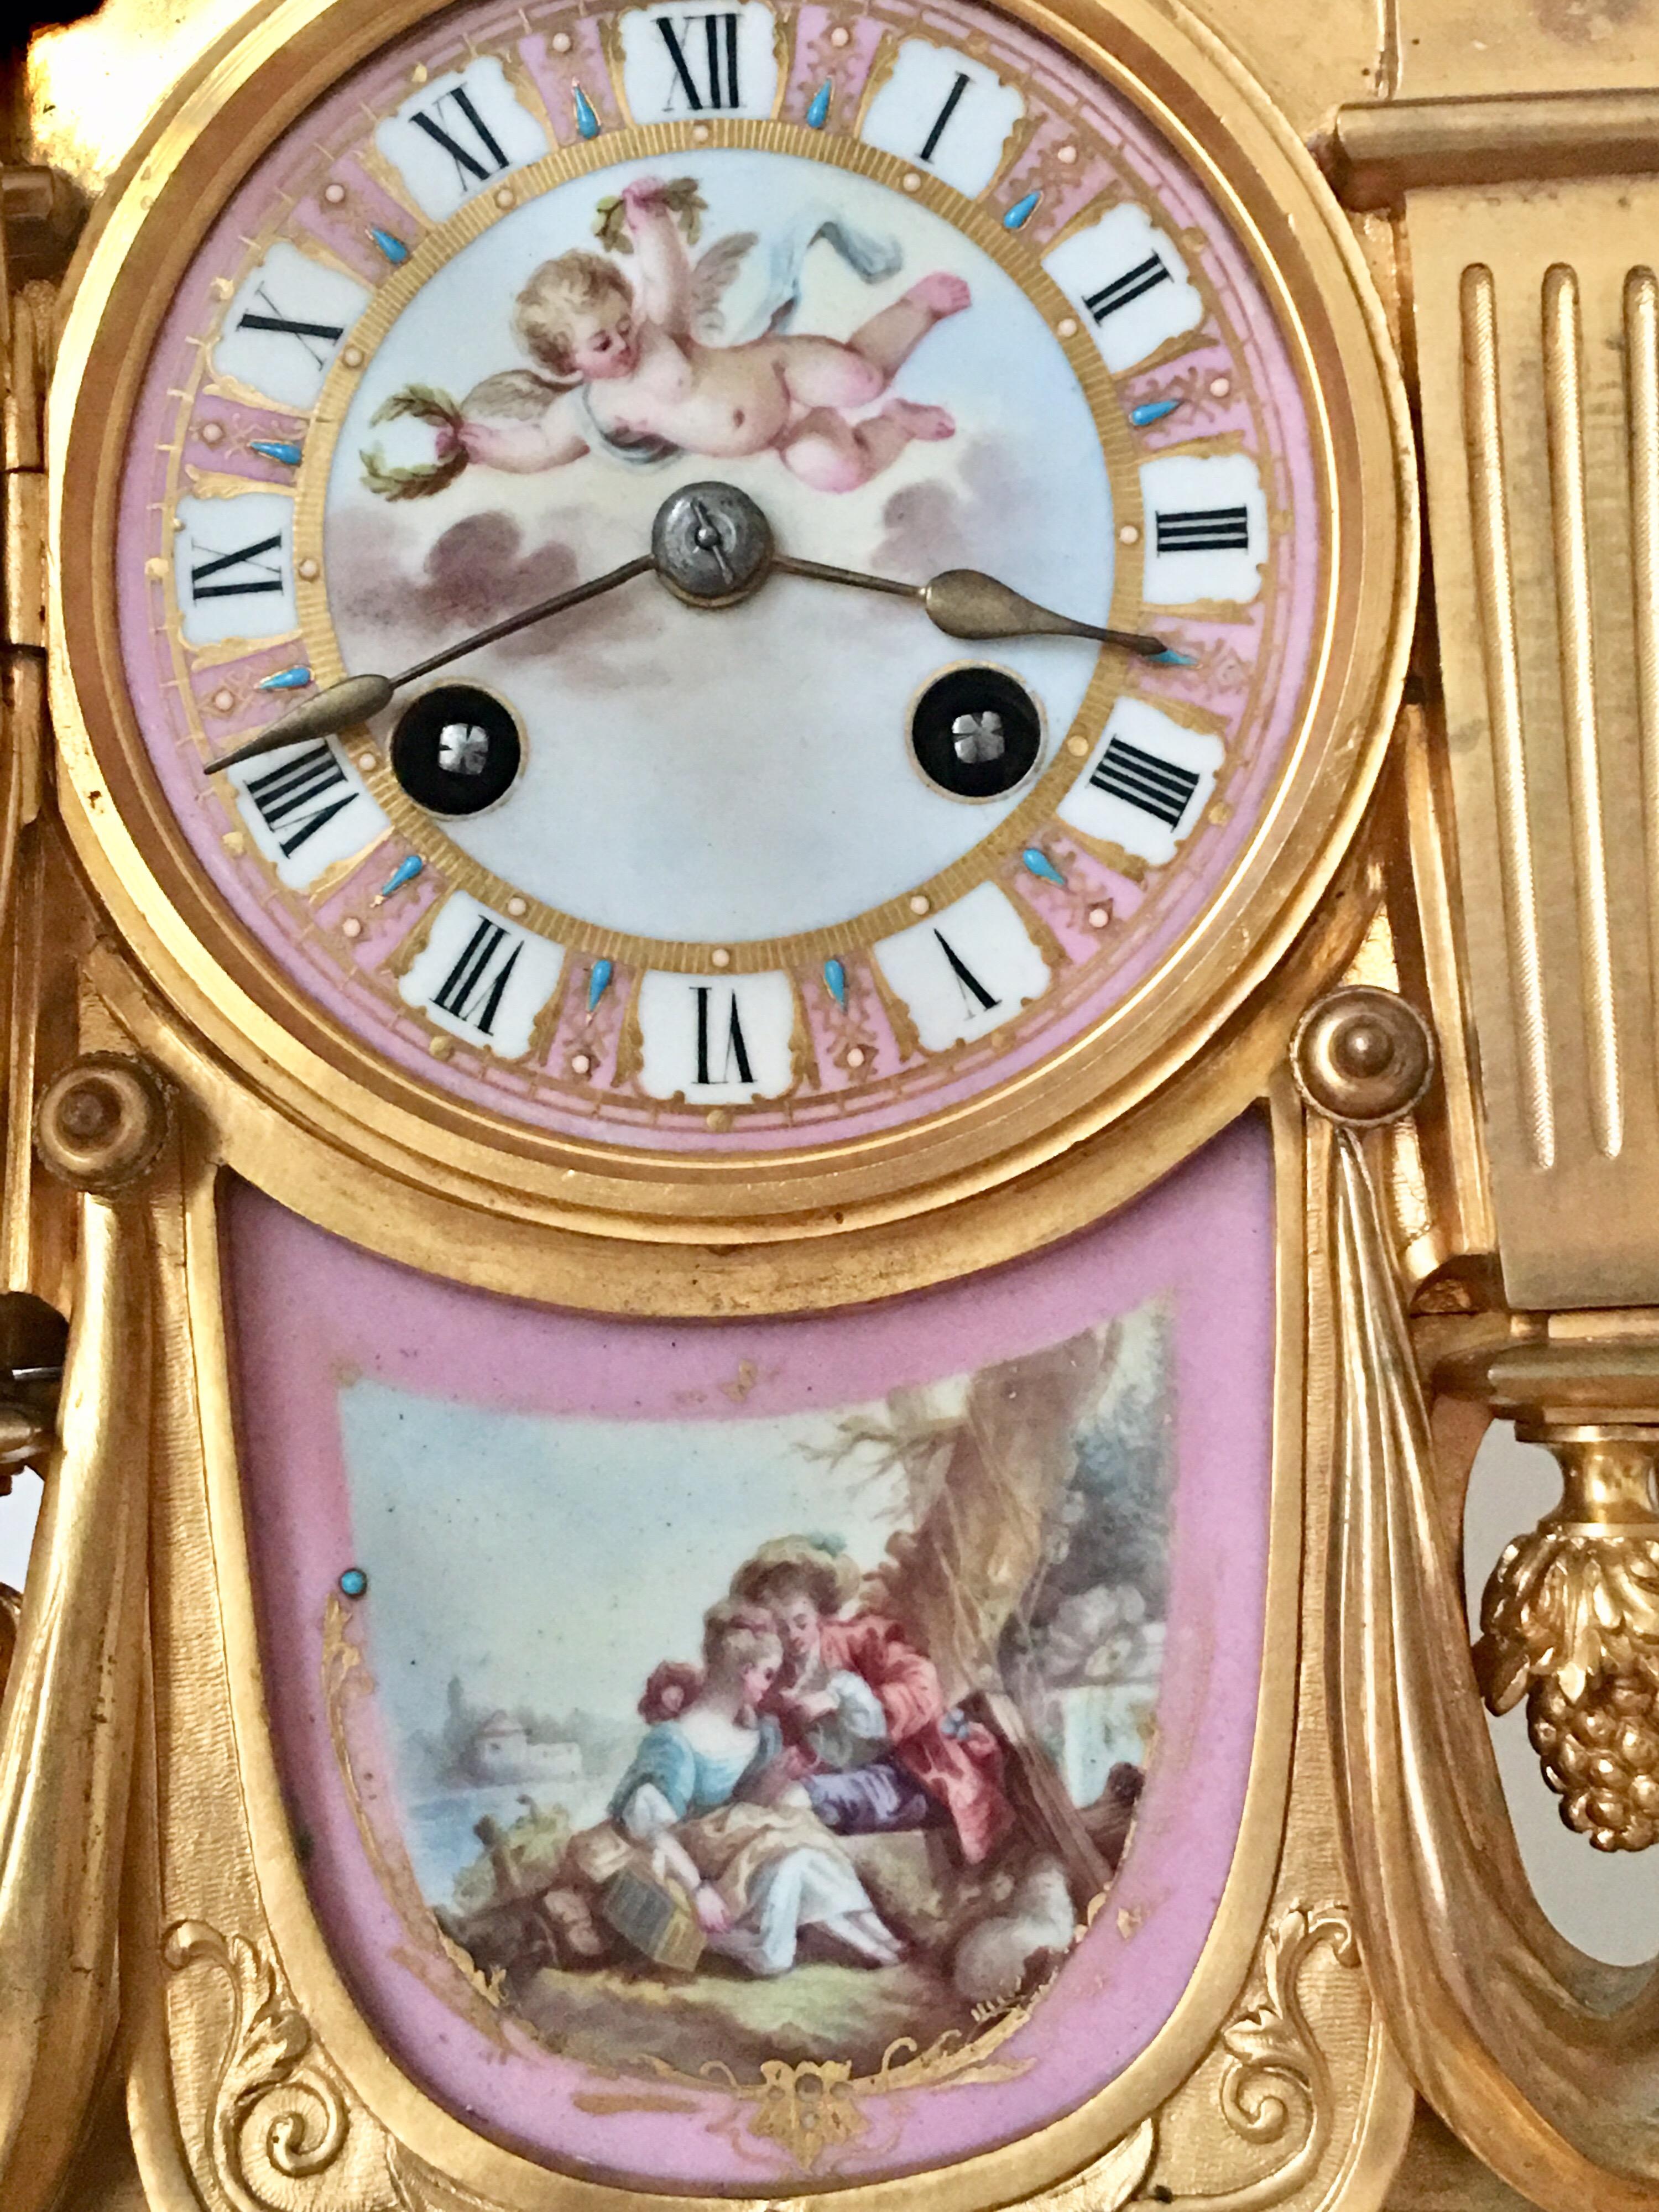 Bronze 3pcs Set Porcelain Ormolu French Clock Signed Howell James & Co. “To the Queen” For Sale